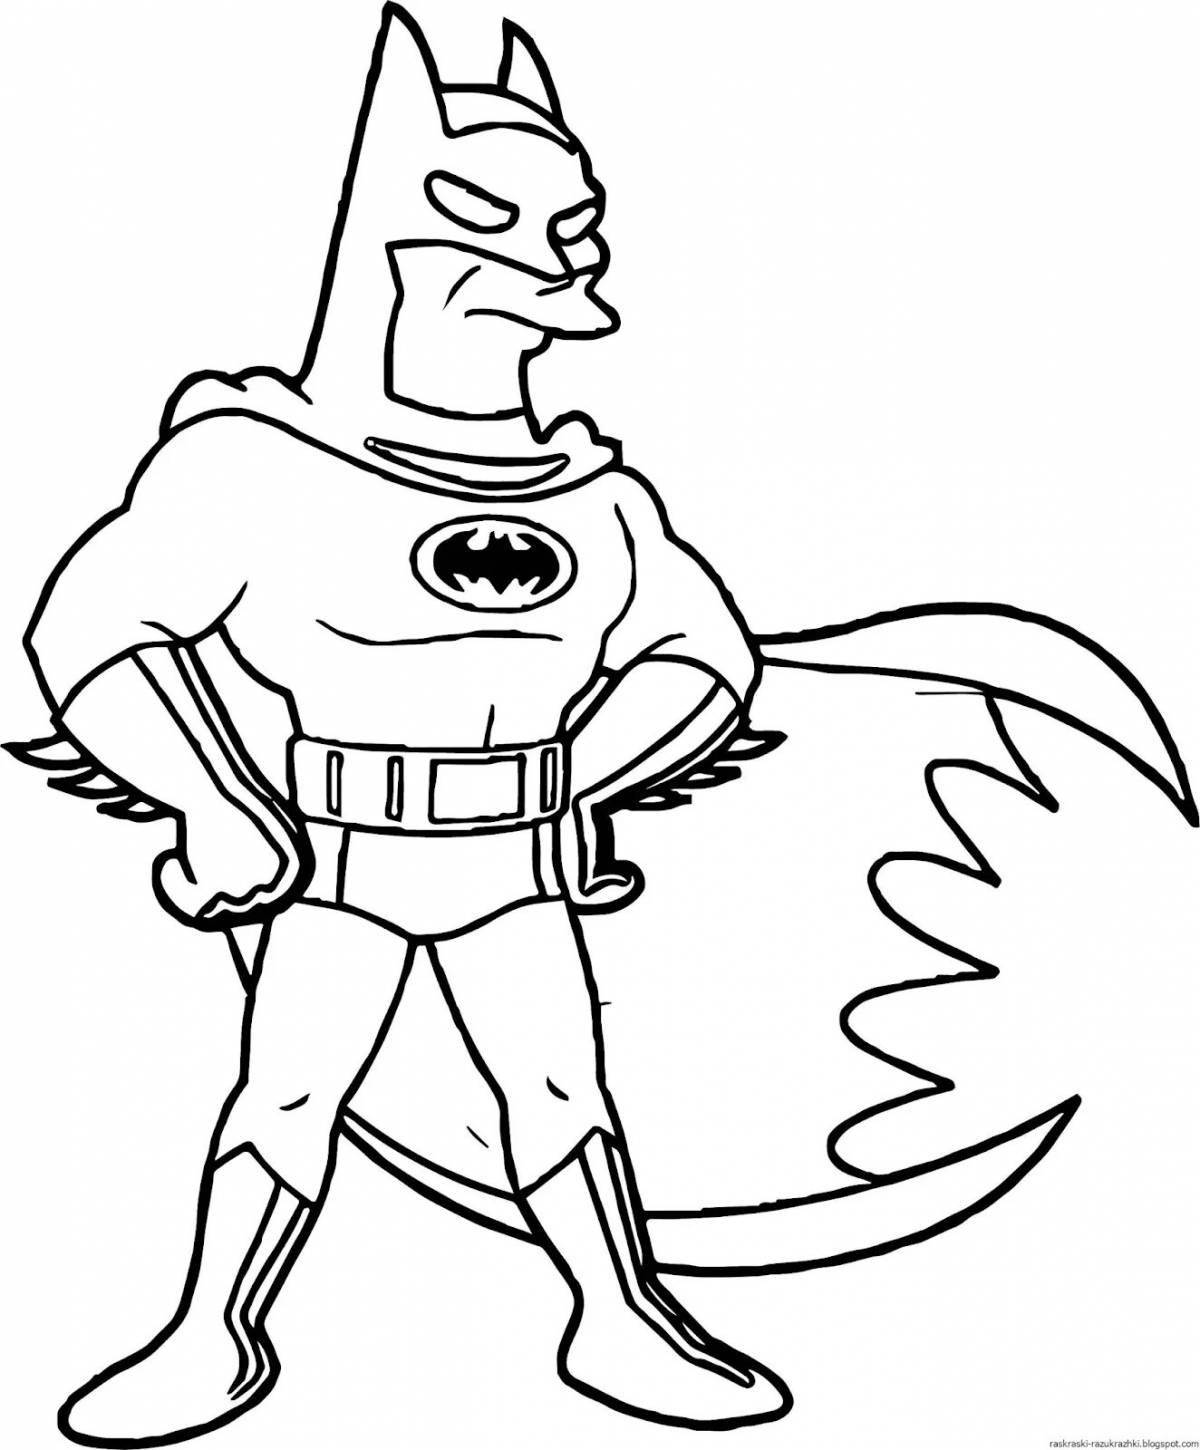 Superb superhero coloring page for boys 5 years old